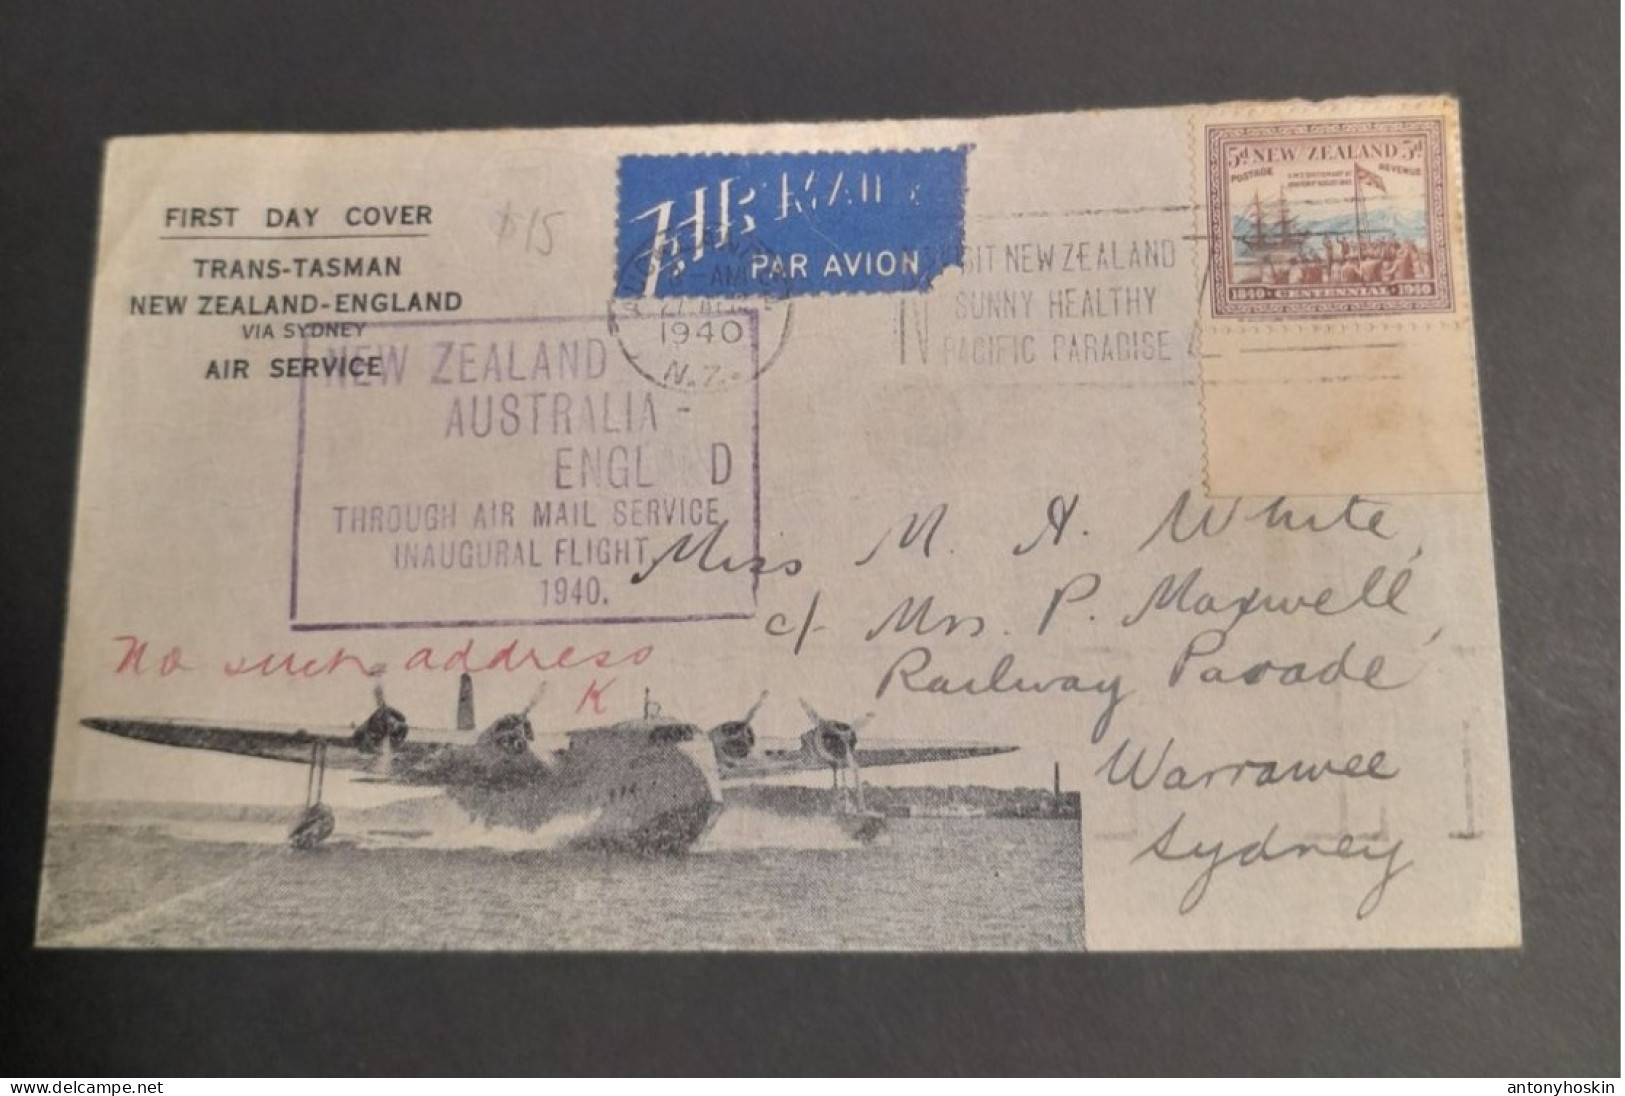 27 April 1940 New Zealand - Australia -England First Day Cover - Airmail